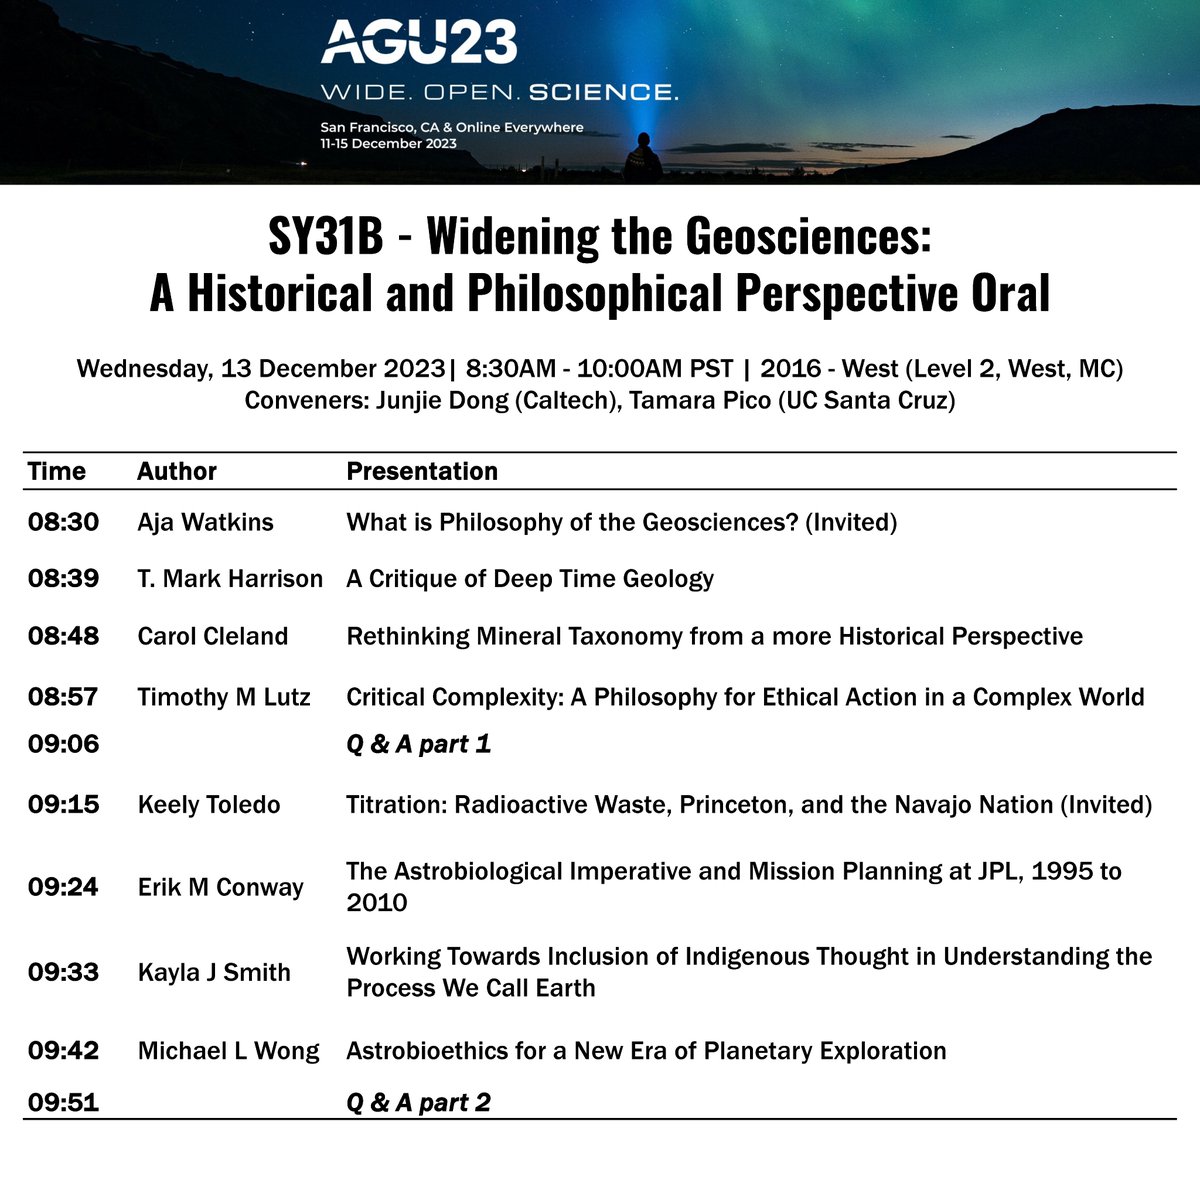 Excited to convene our SY session on the history & philosophy of geoscience again at #AGU23. Join us for talks from deep time geology to astrobiological ethics with a stellar lineup! 📅: Dec 13, 2023 ⏰: 8:30AM - 10:00AM PST 🌐: agu.confex.com/agu/fm23/meeti…